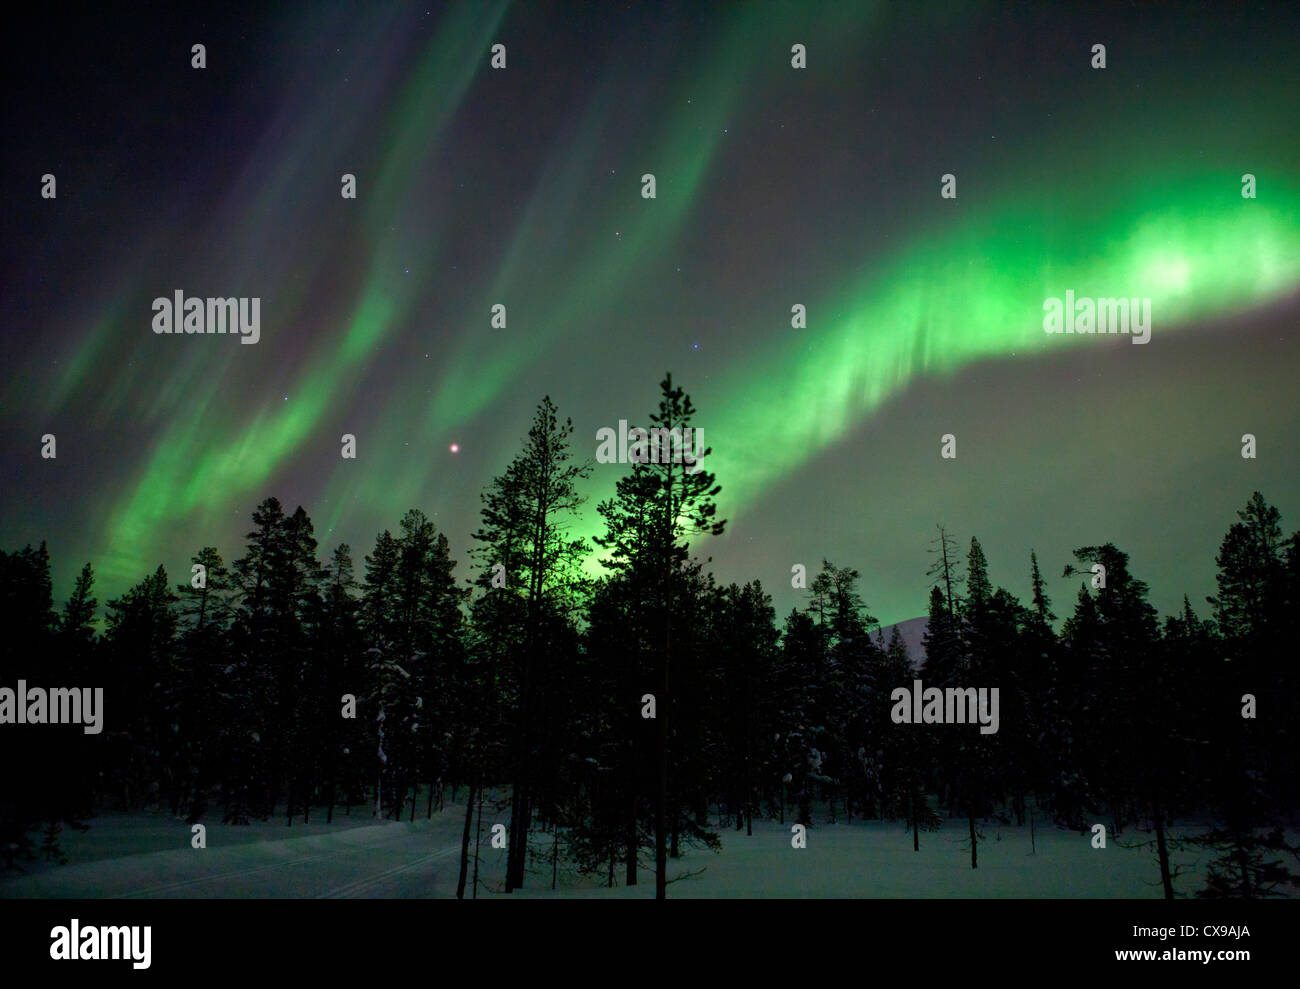 Northern lights or Aurora Borealis in northern Finland. Stock Photo